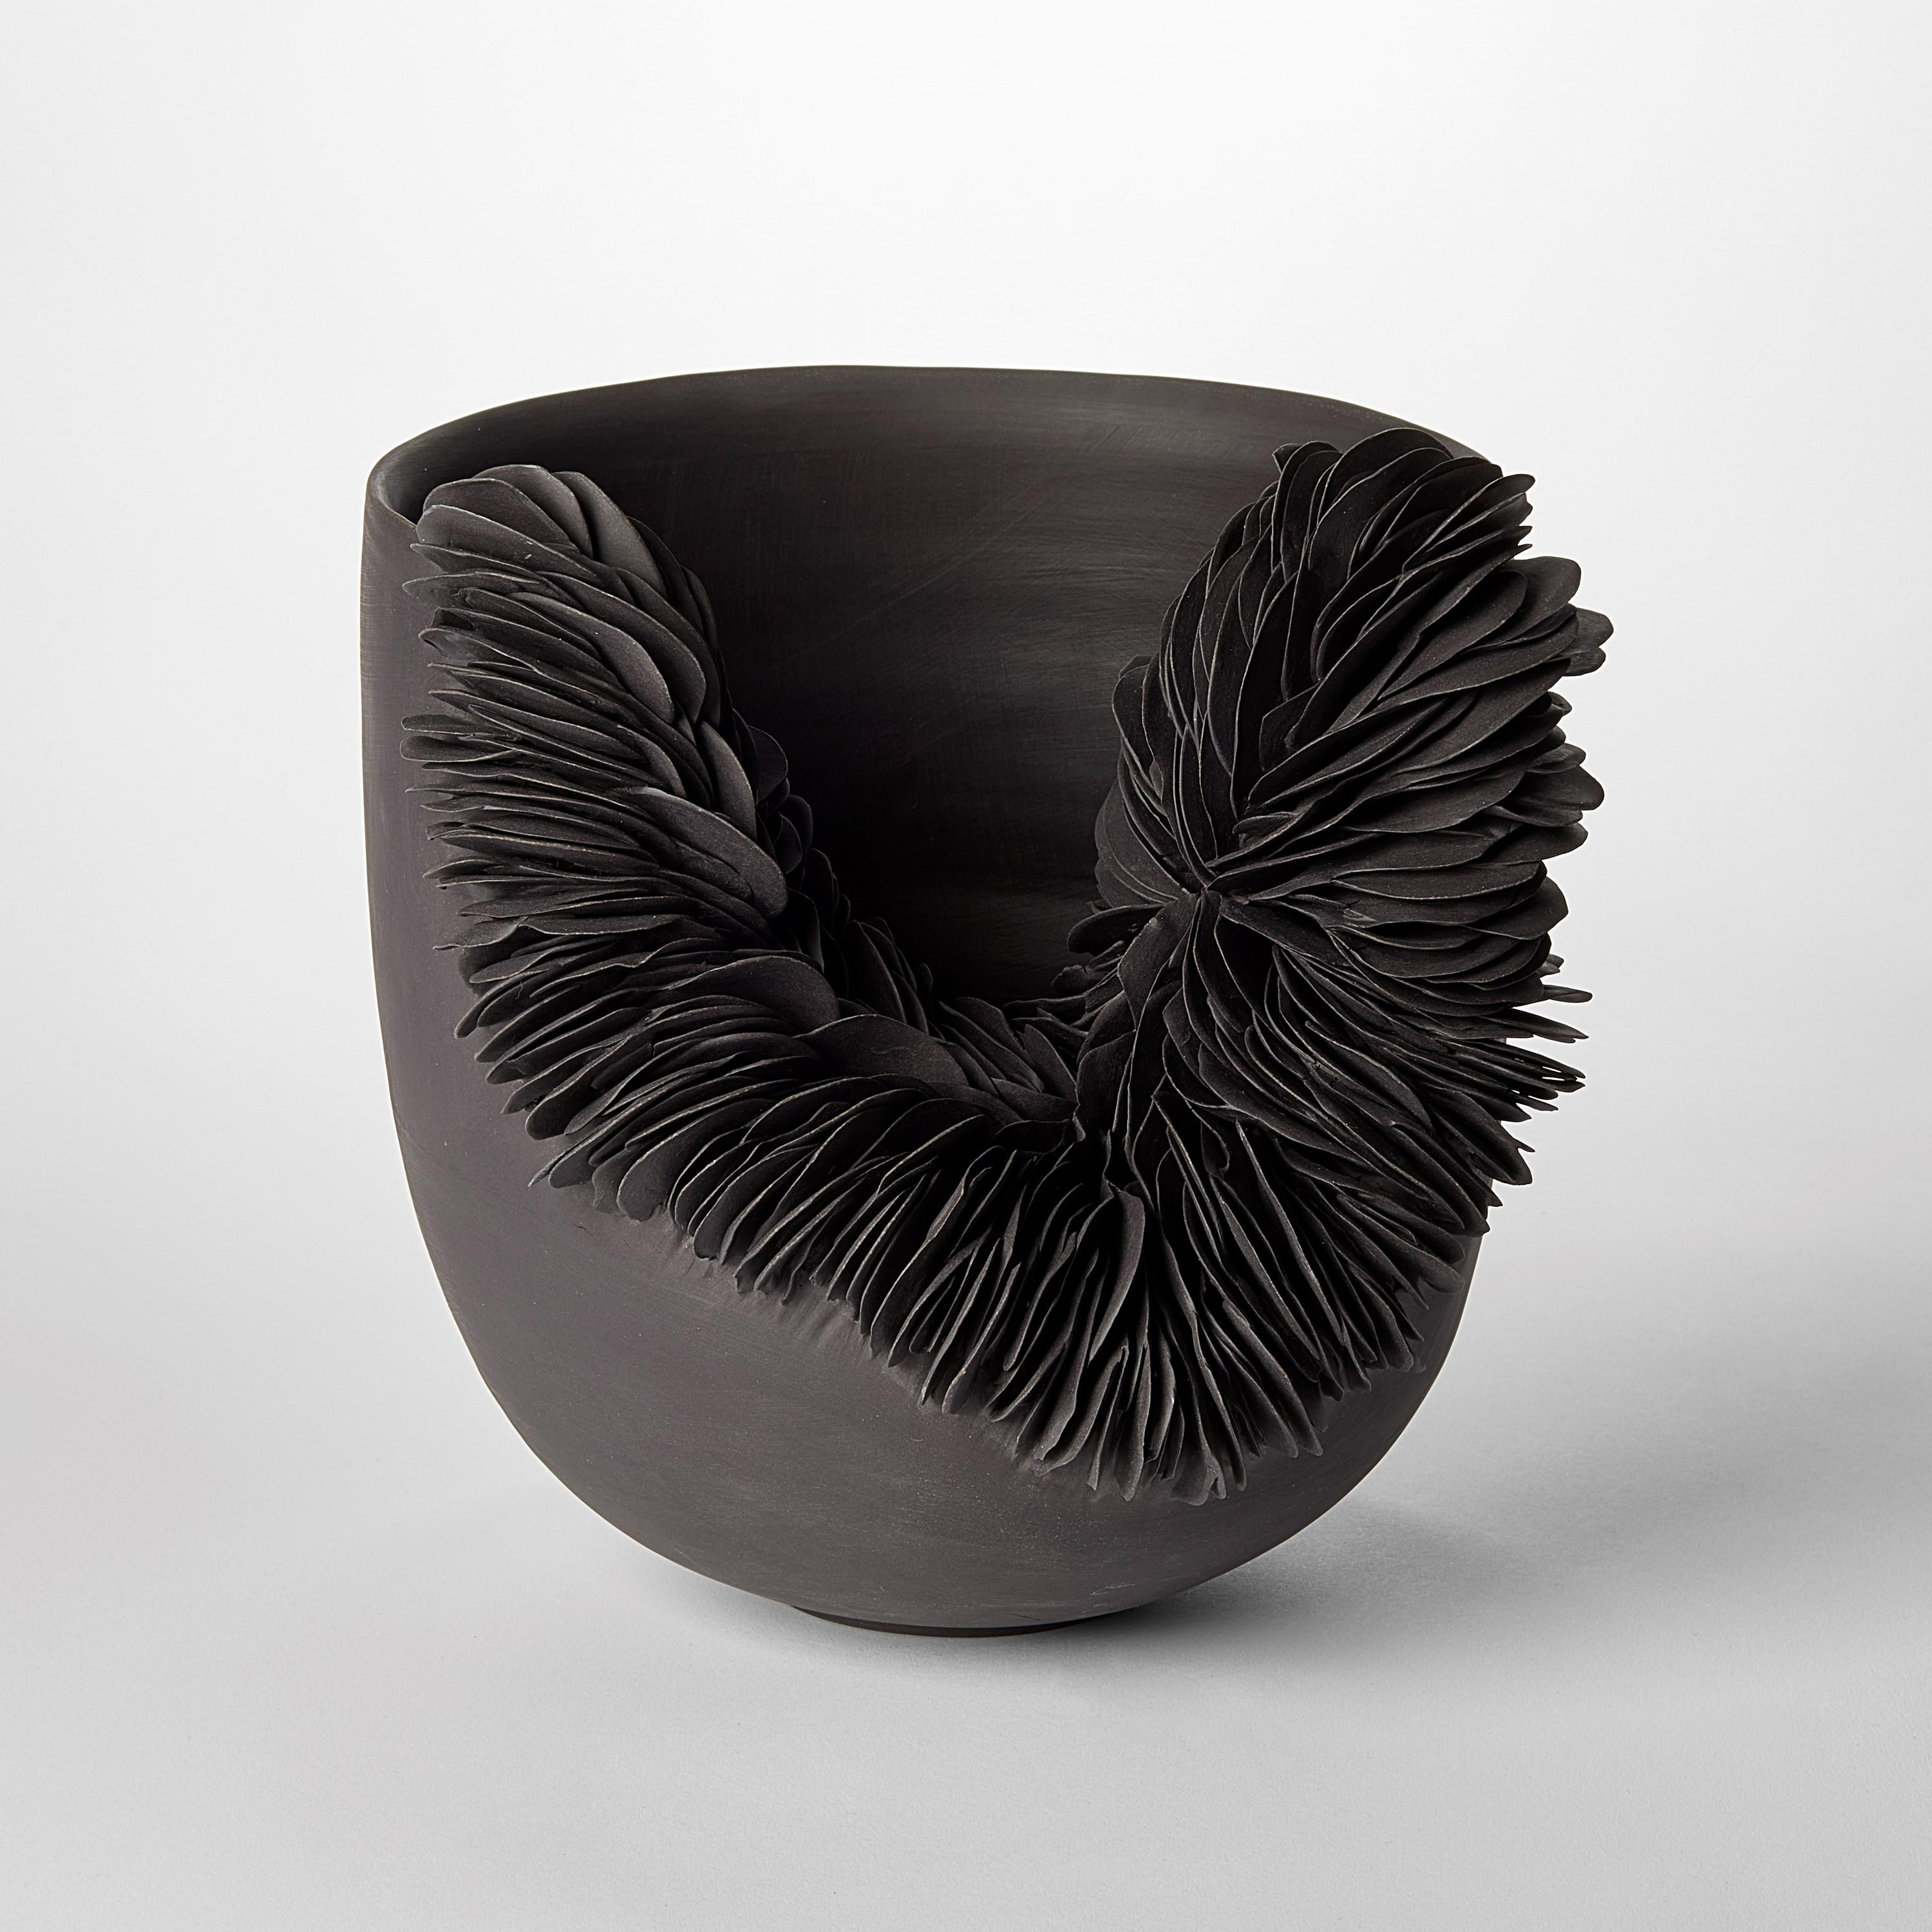 'Black Collapsed Bowl' is a unique porcelain sculpture by the British artist, Olivia Walker.

Walker works in porcelain to create pieces that explore ideas of growth and decay through the construction and layering of complex surfaces.

All of her